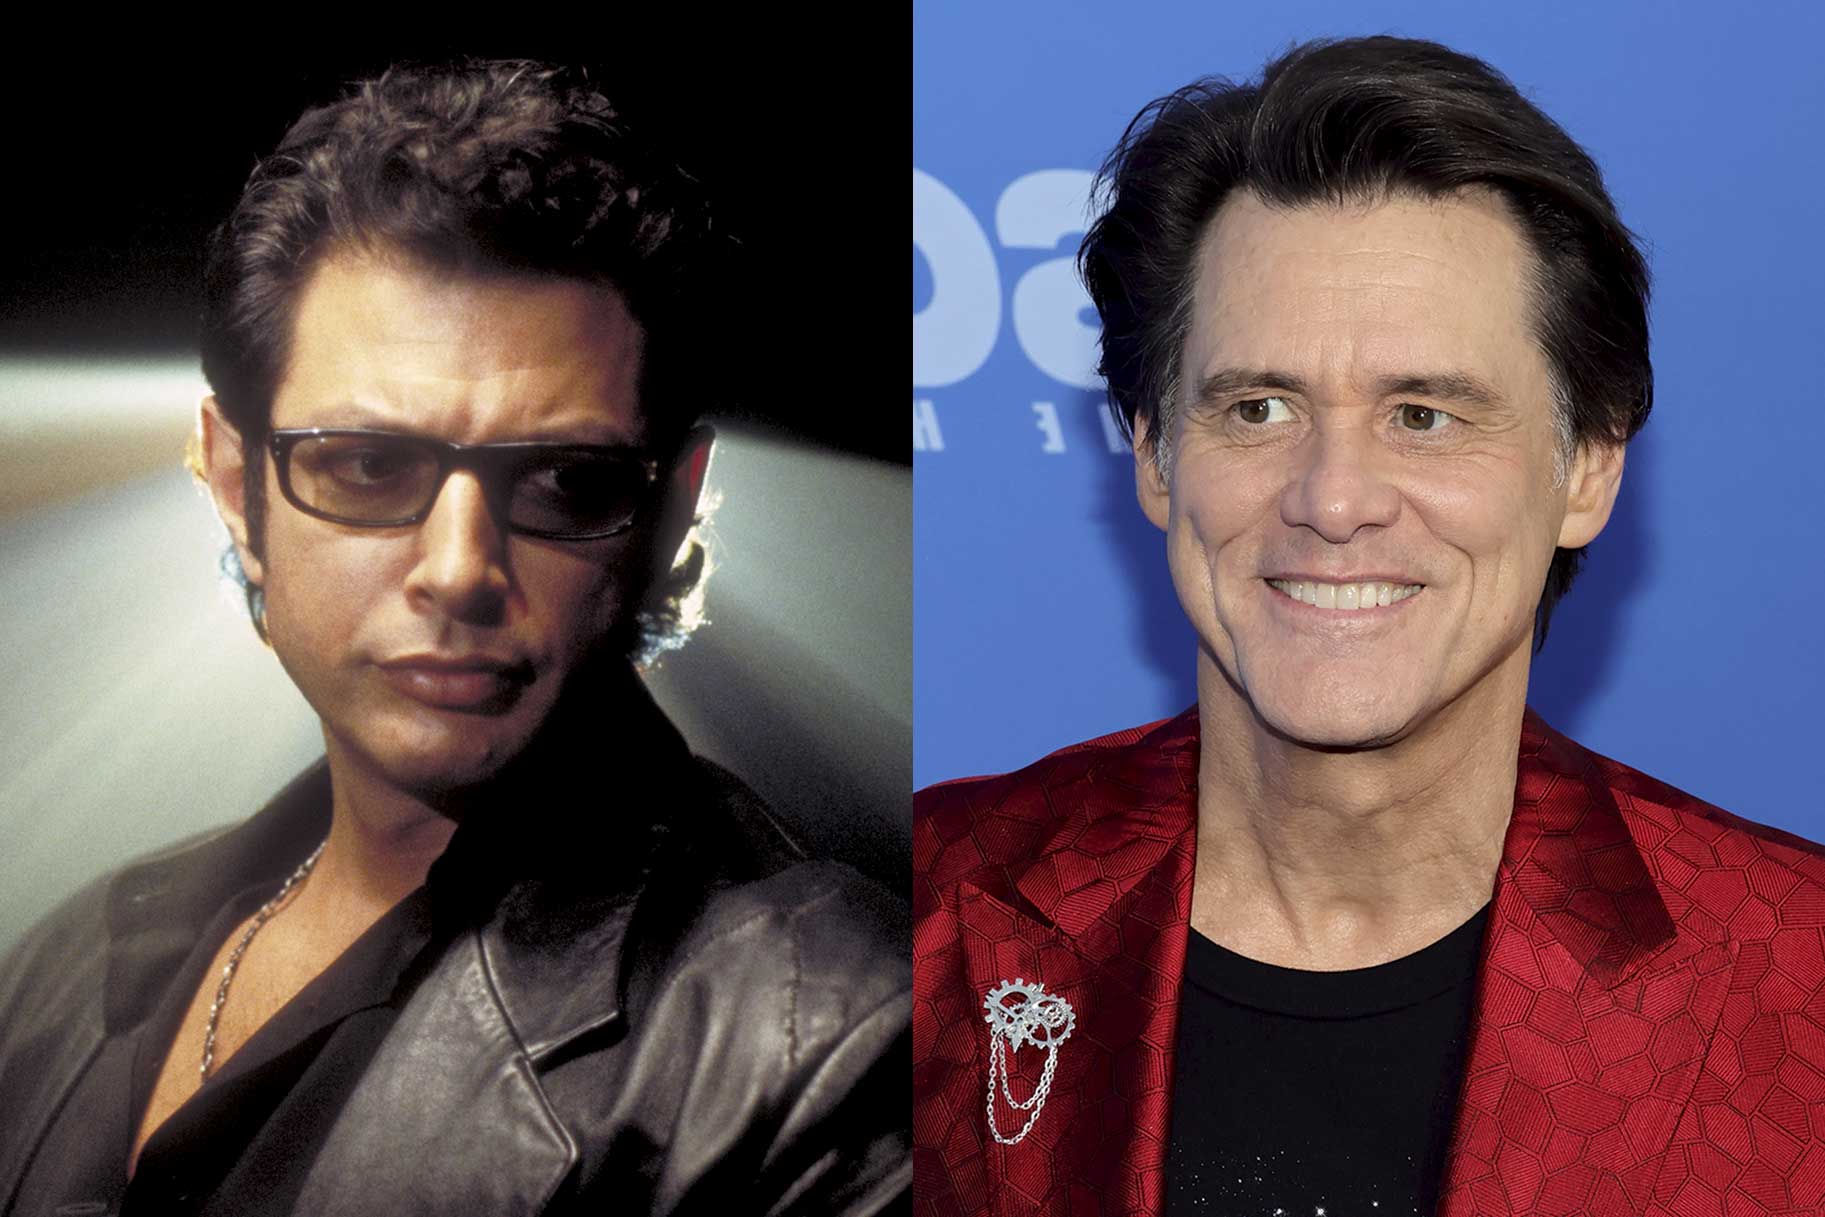 A side by side of Jeff Goldbum in Jurassic Park and Jim Carey on the red carpet